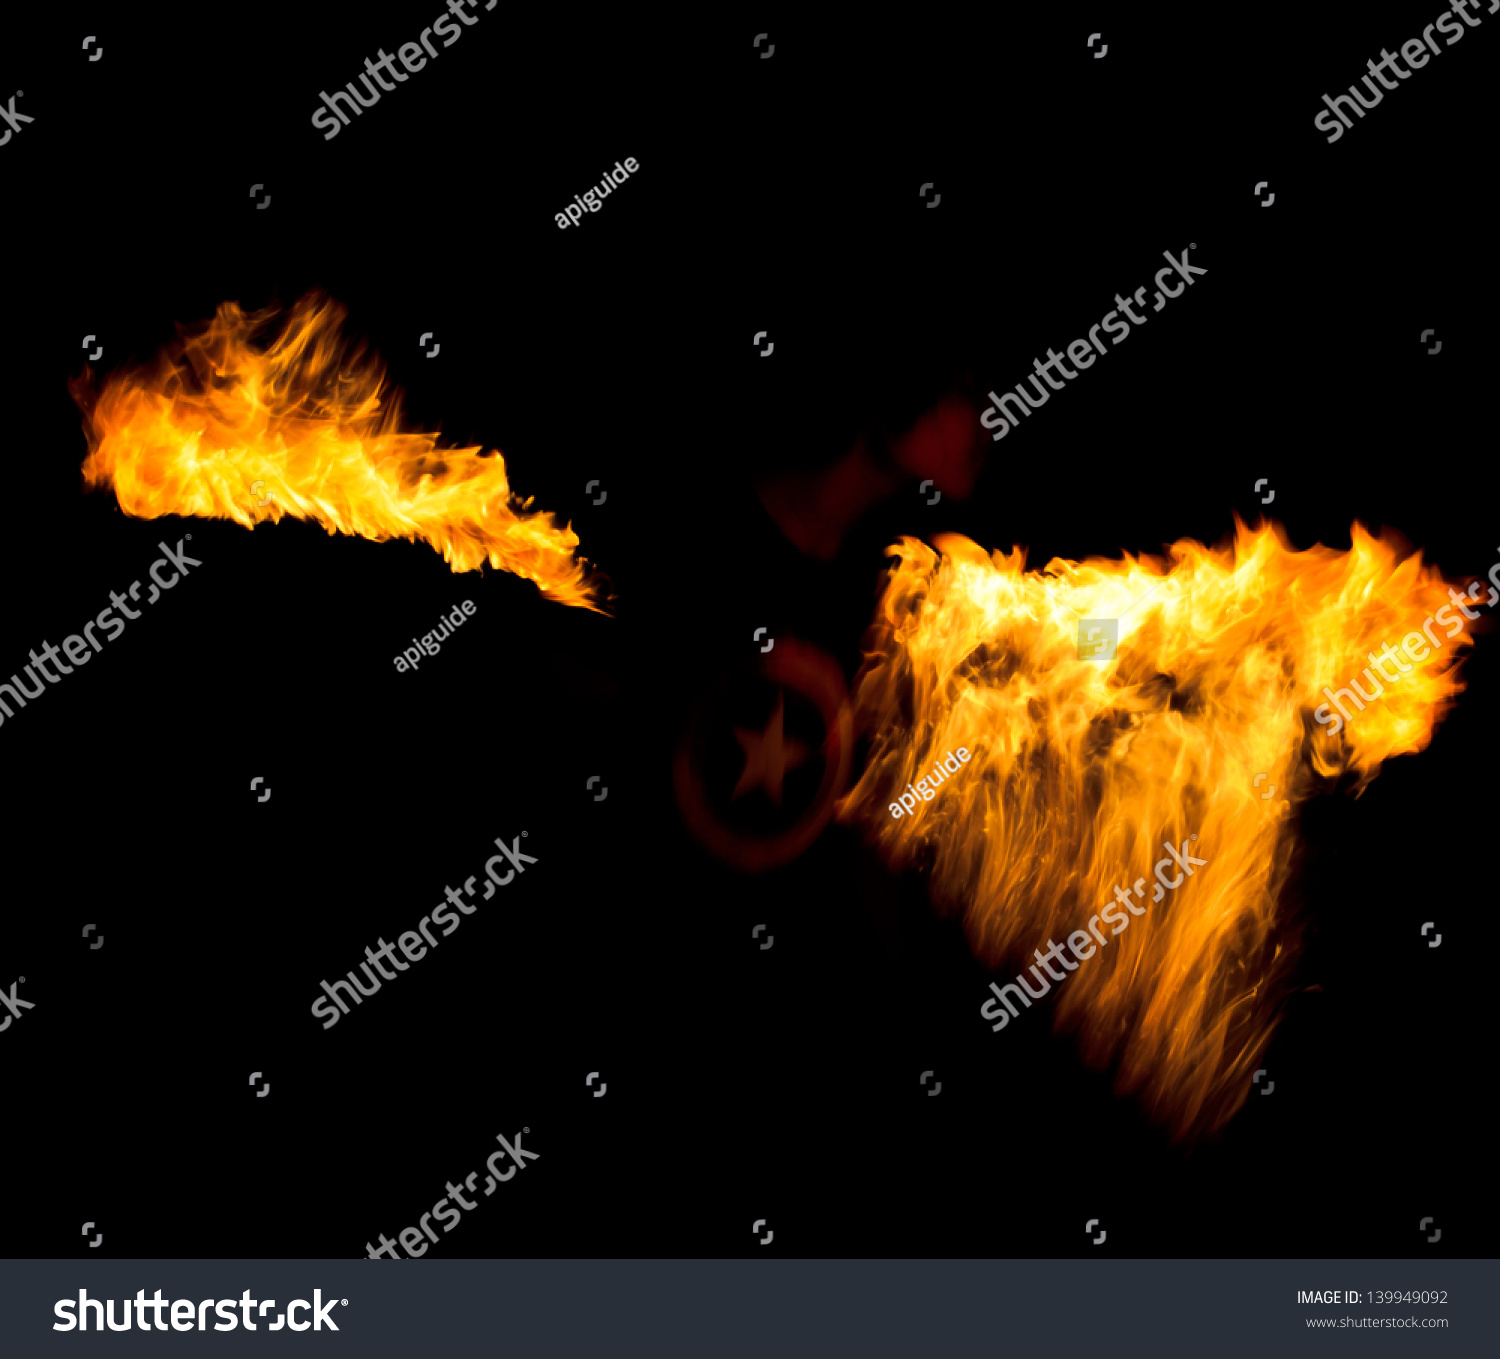 Abstract Drawing Flaming Trails Night Performance Stock Photo ...